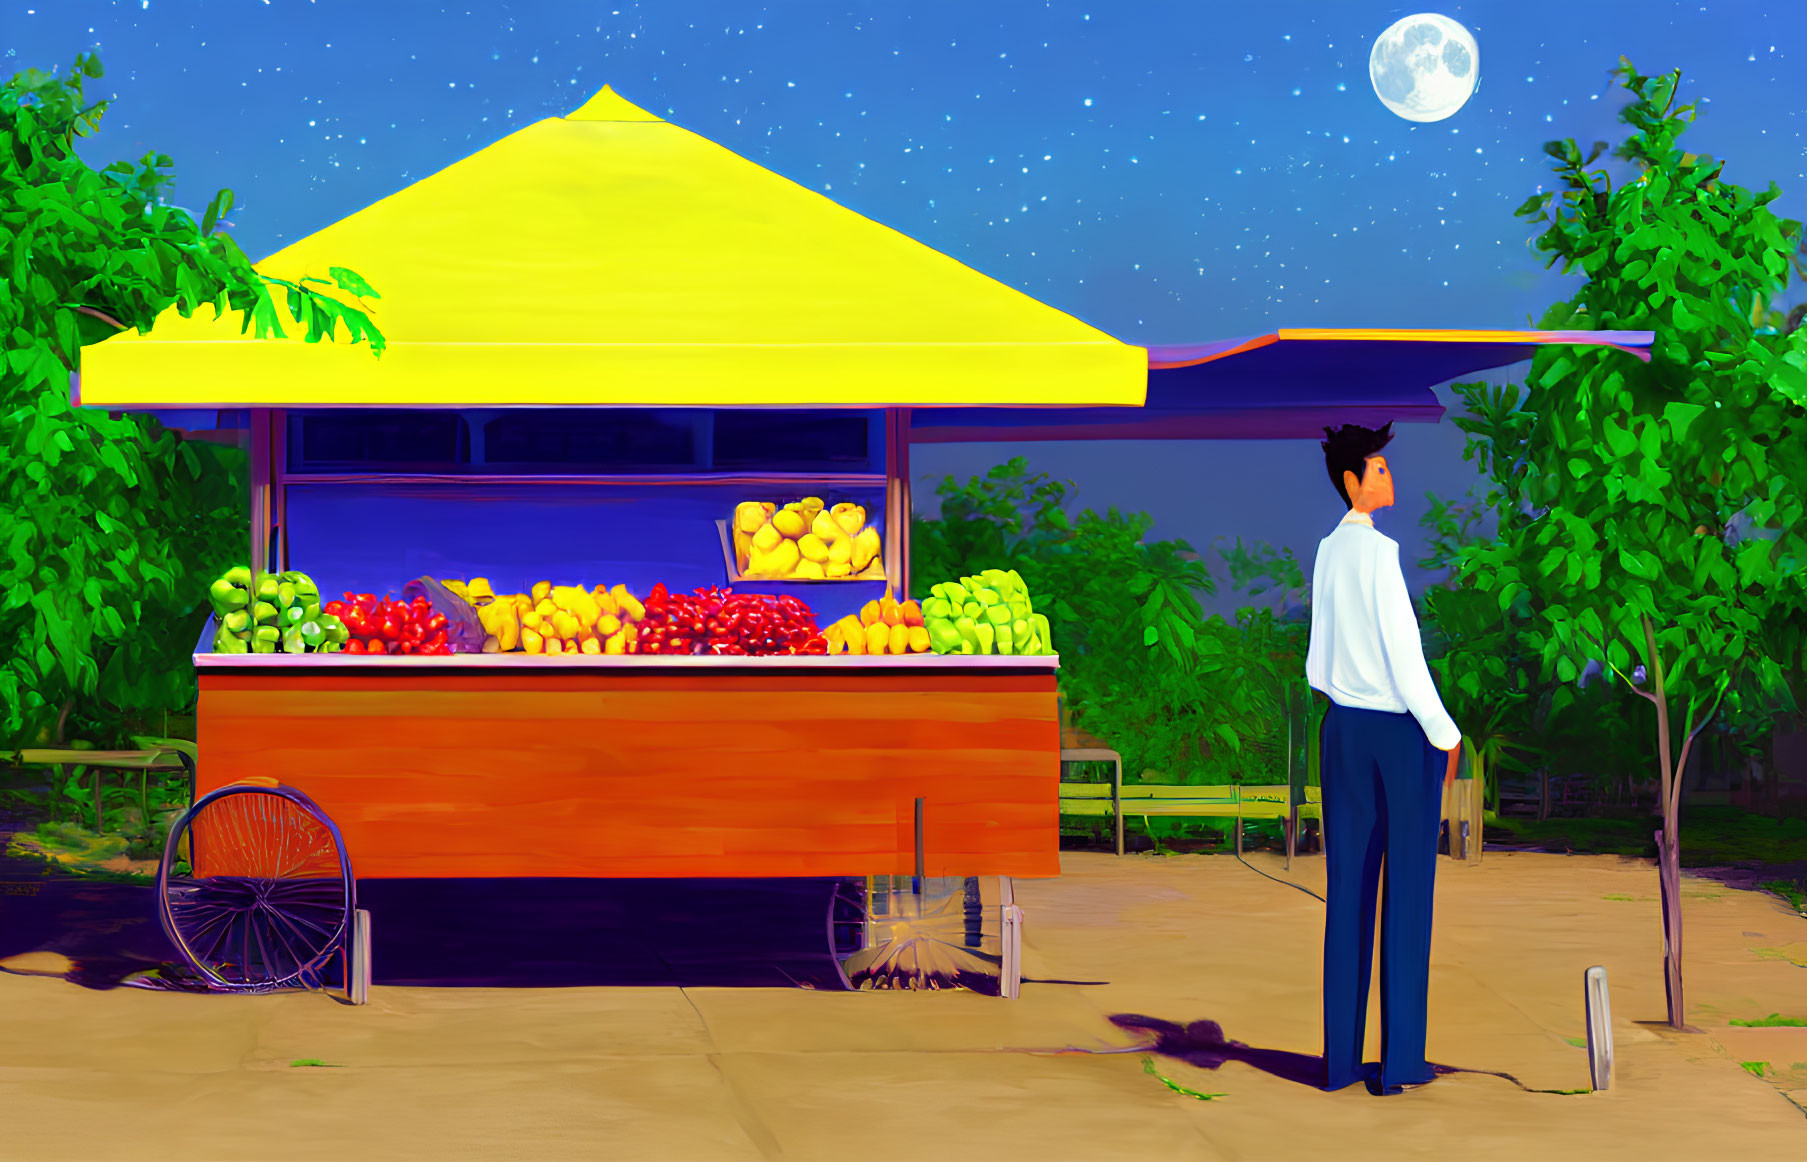 Man in white shirt at colorful fruit stand under starry sky with full moon